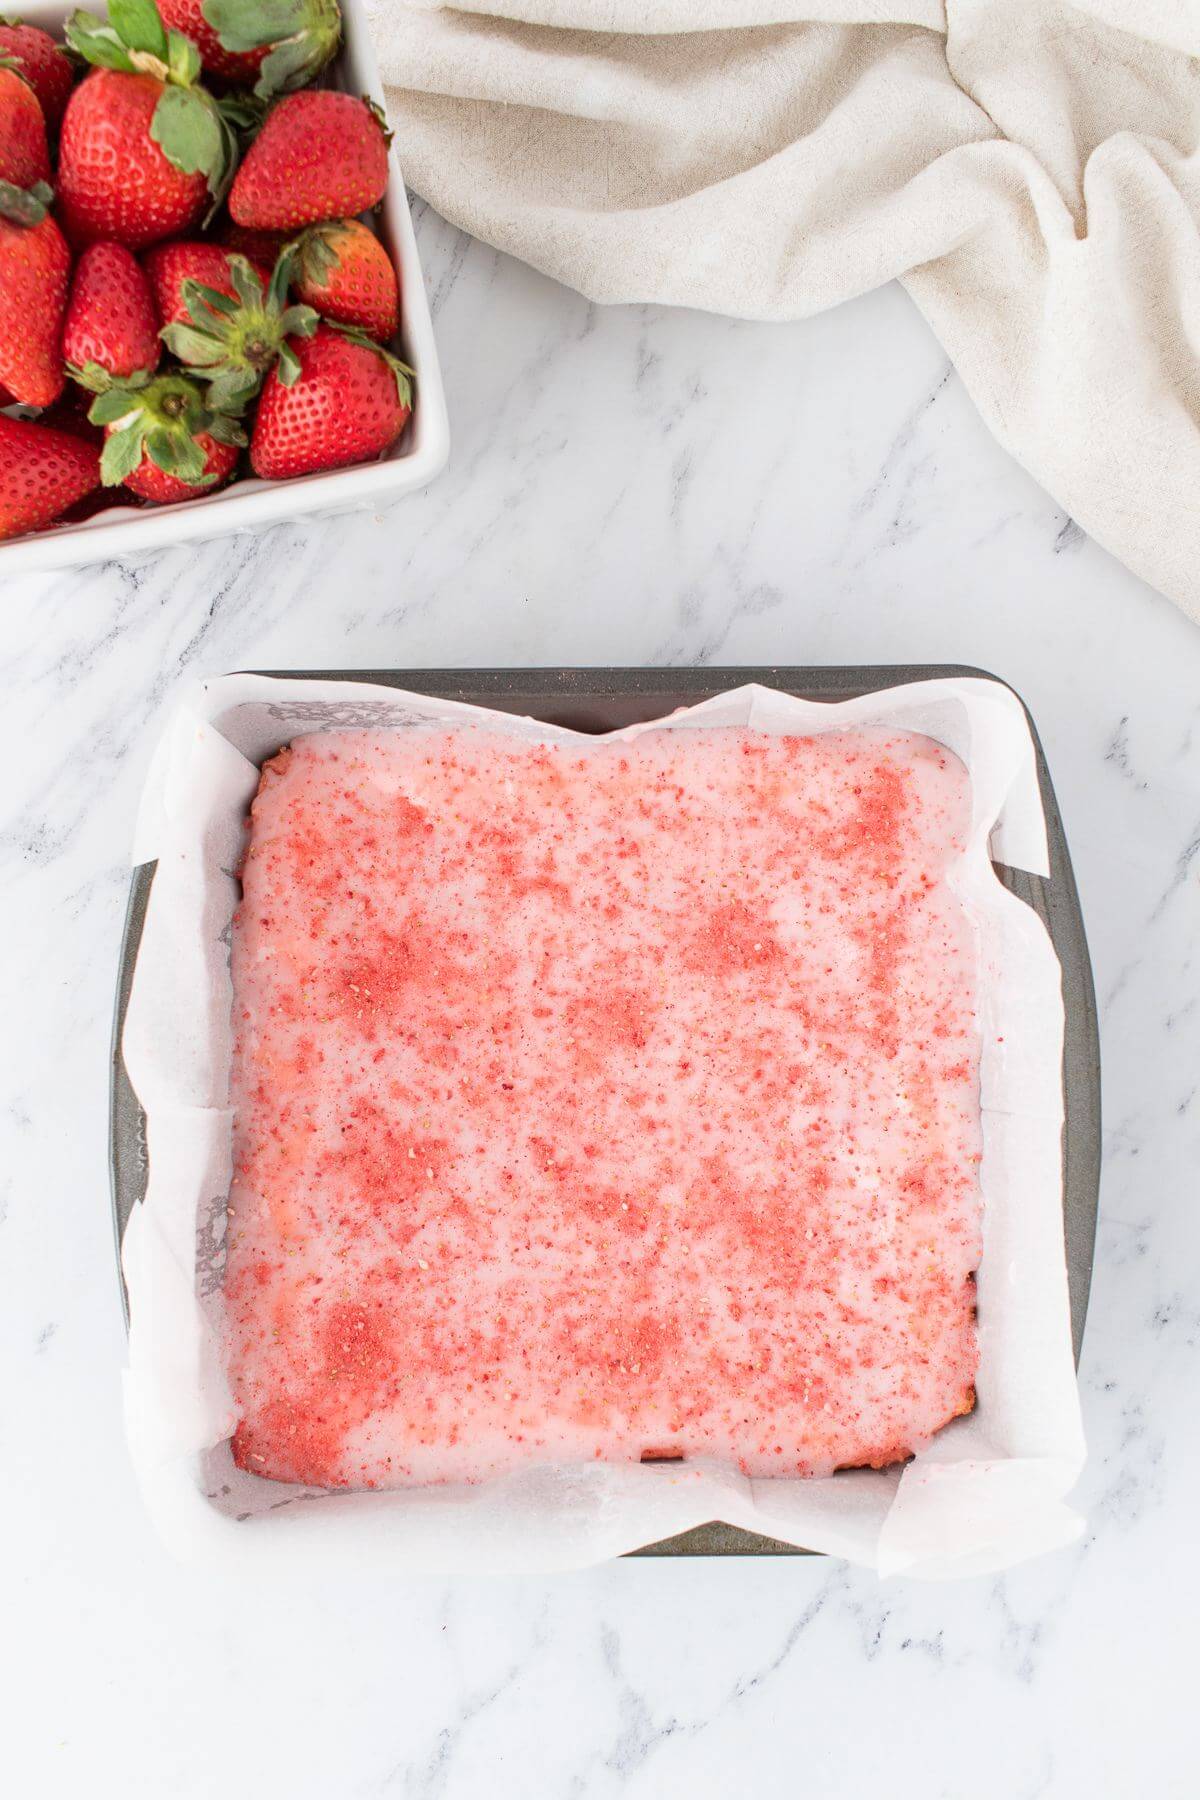 A pink cake is topped with more pink powder in a cake pan.